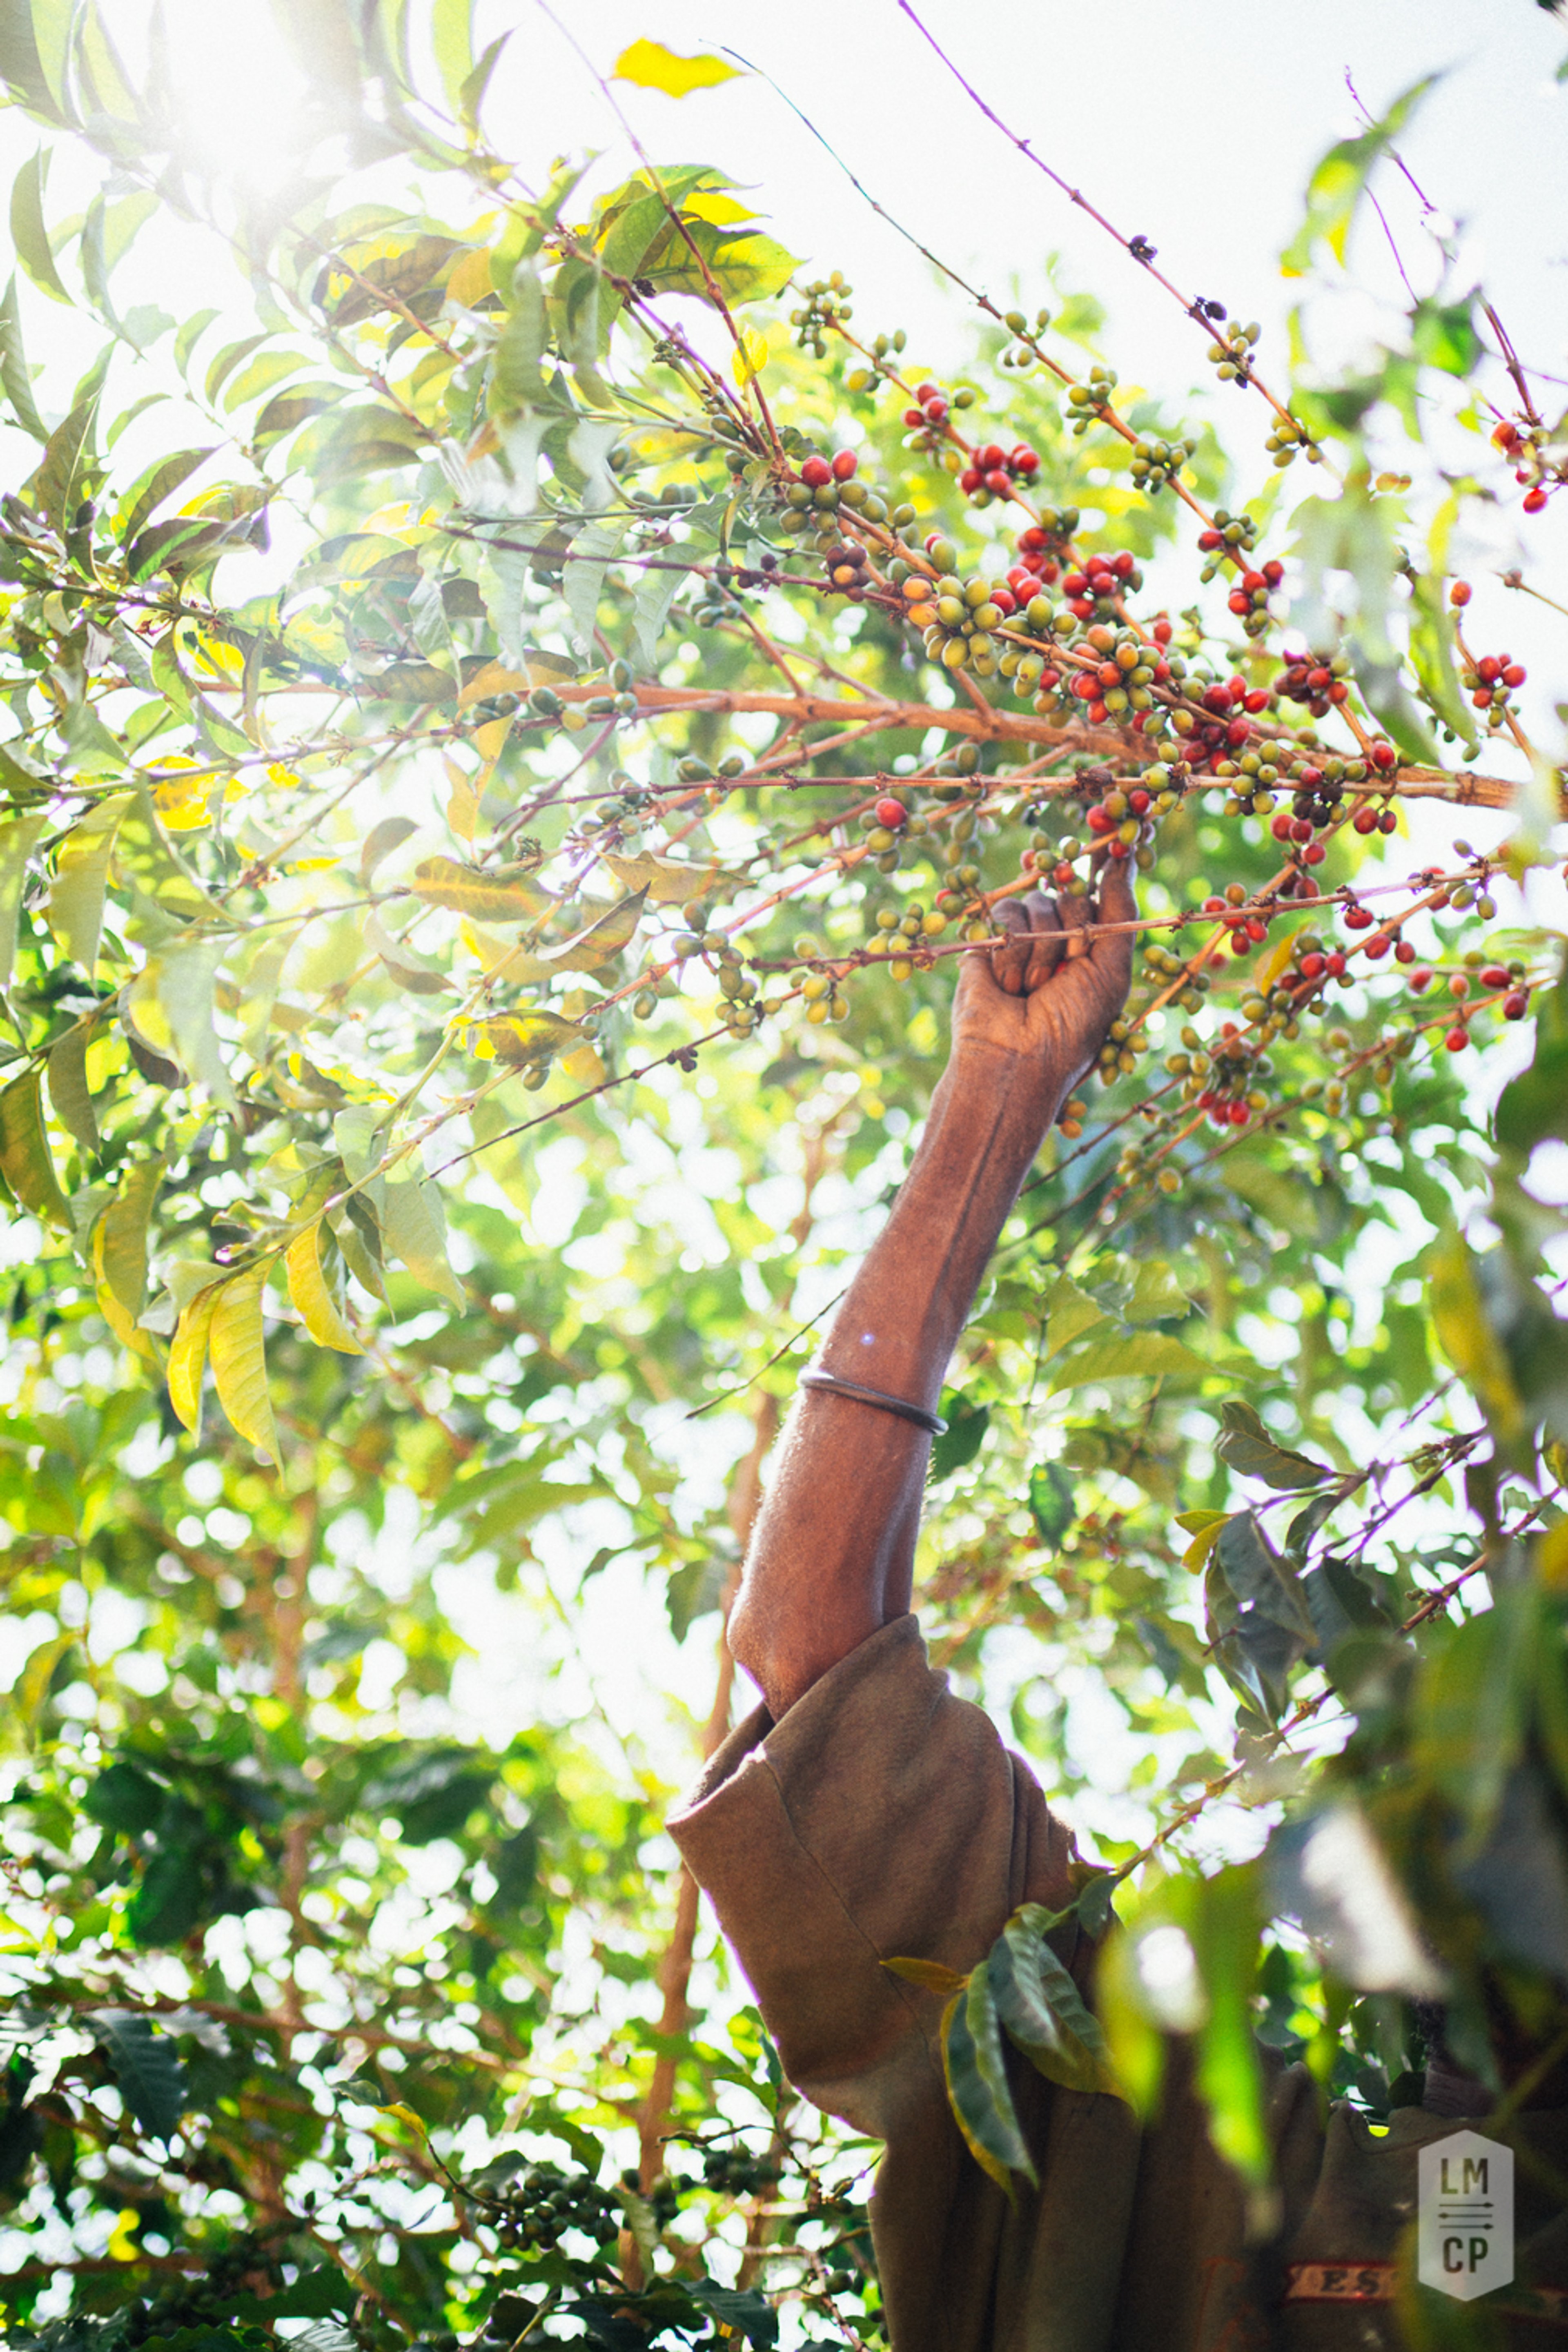 We source the majority of our world-class, speciality coffee from South and Central America.